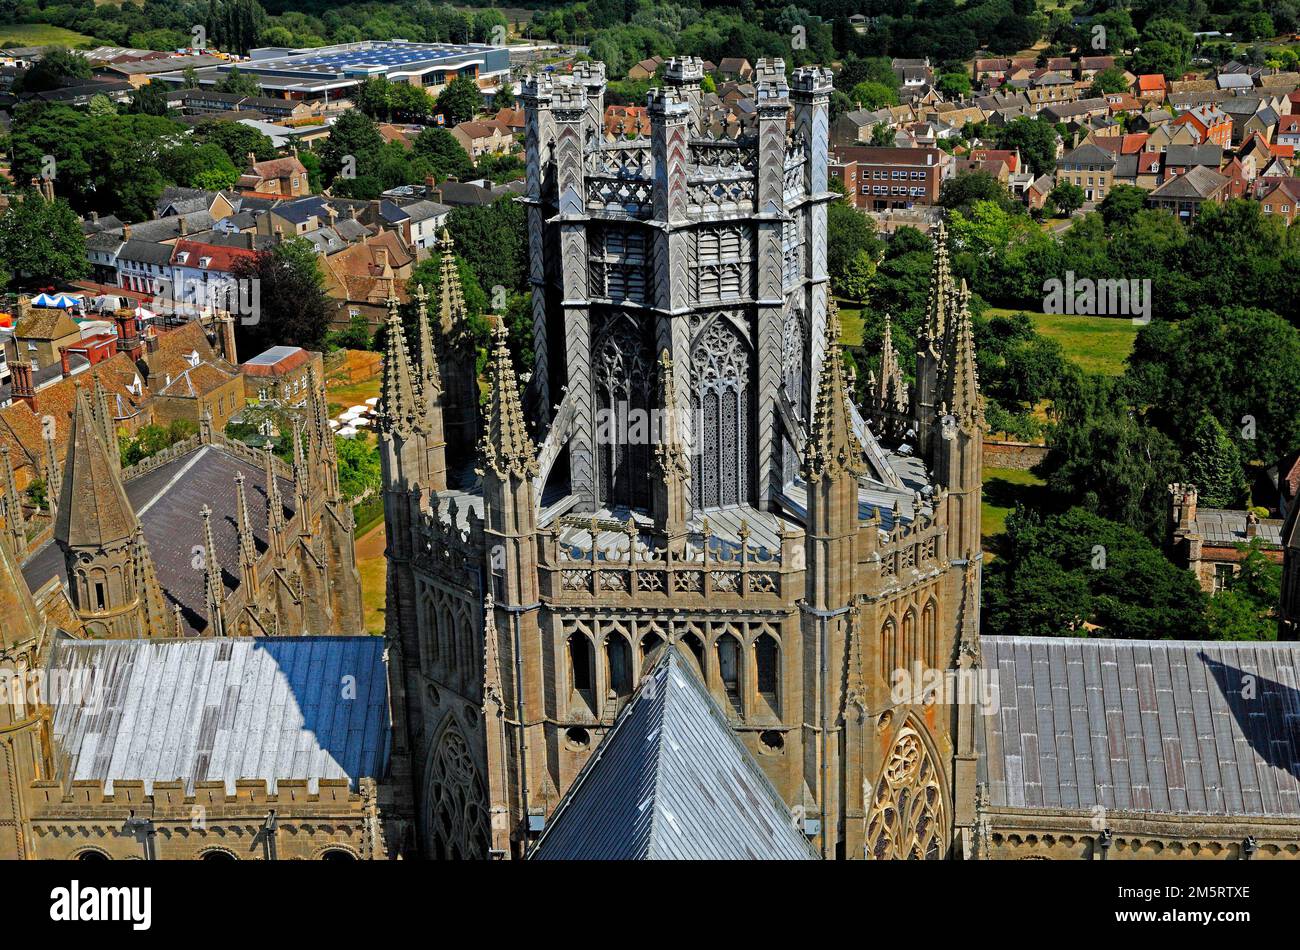 Ely Cathedral, Octagon, Lantern tower, and City from West Tower, Cambridgeshire, England, UK Stock Photo